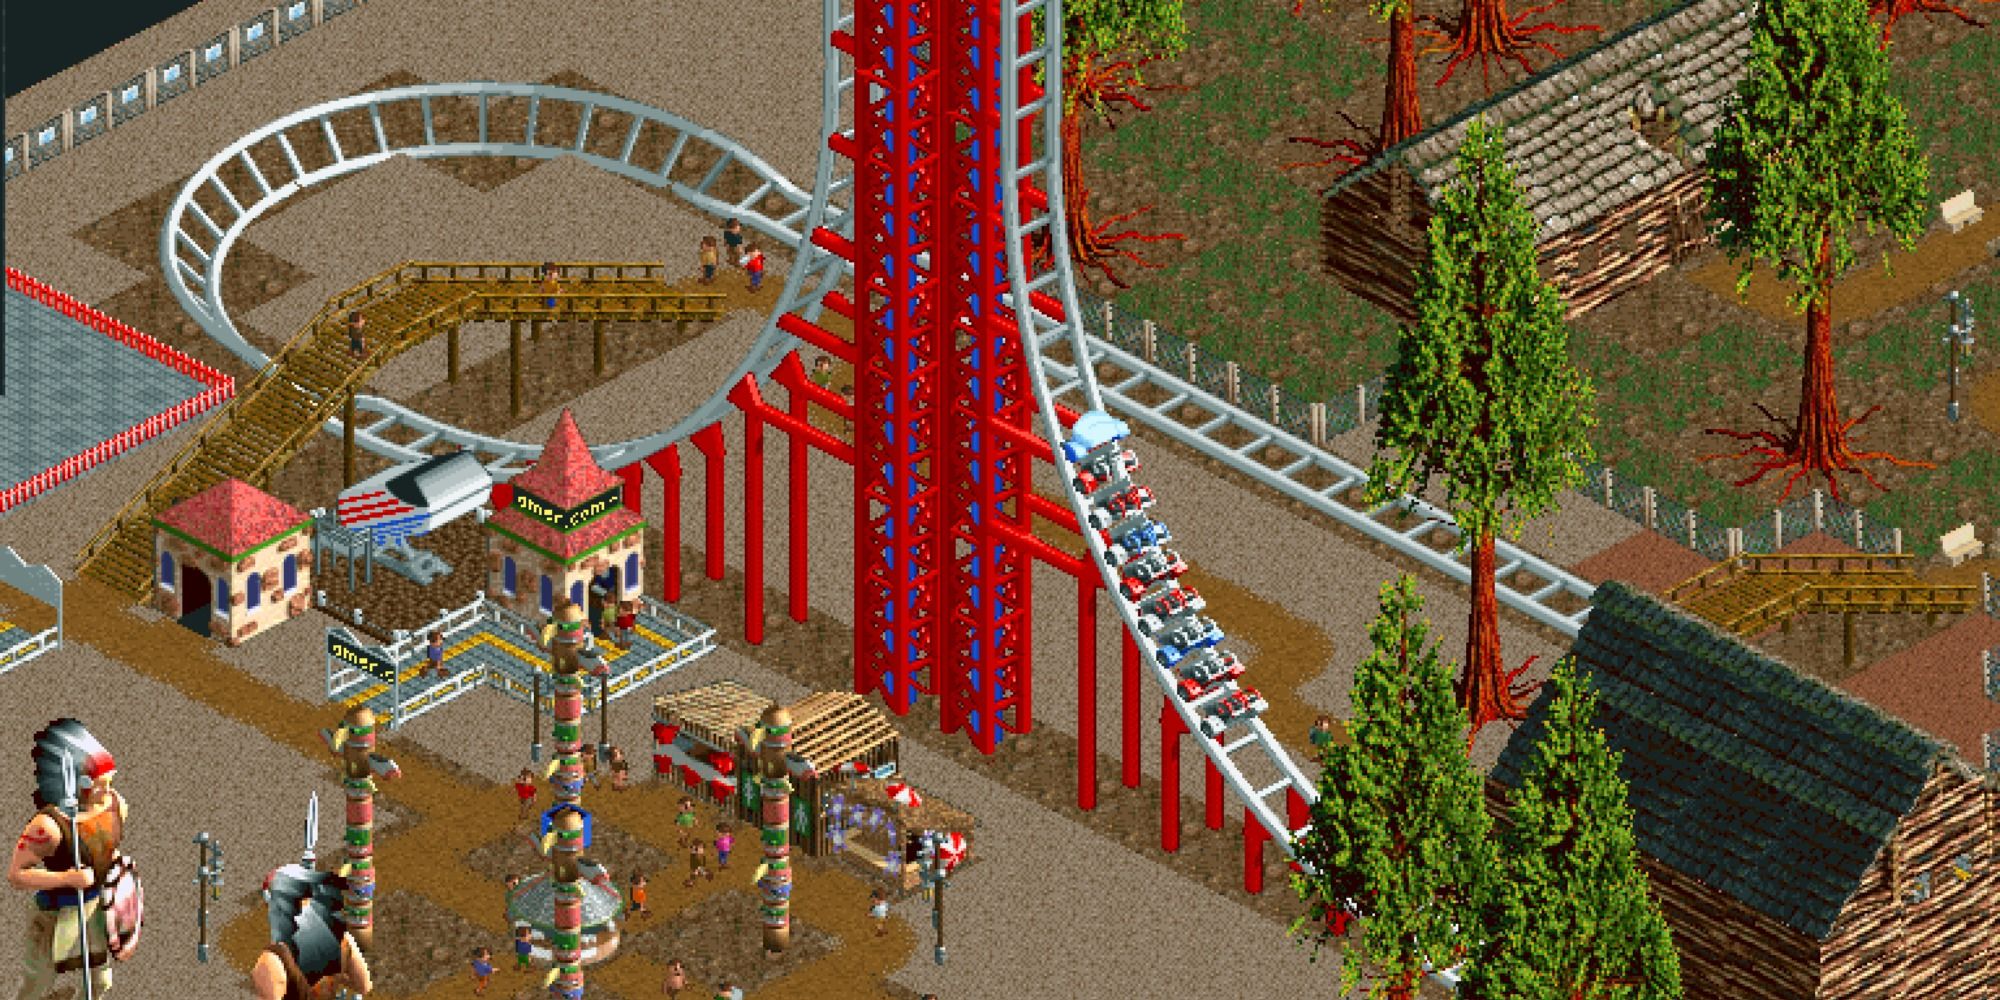 Roller Coaster Tycoon Air Powered Vertical Coaster in a sandy park